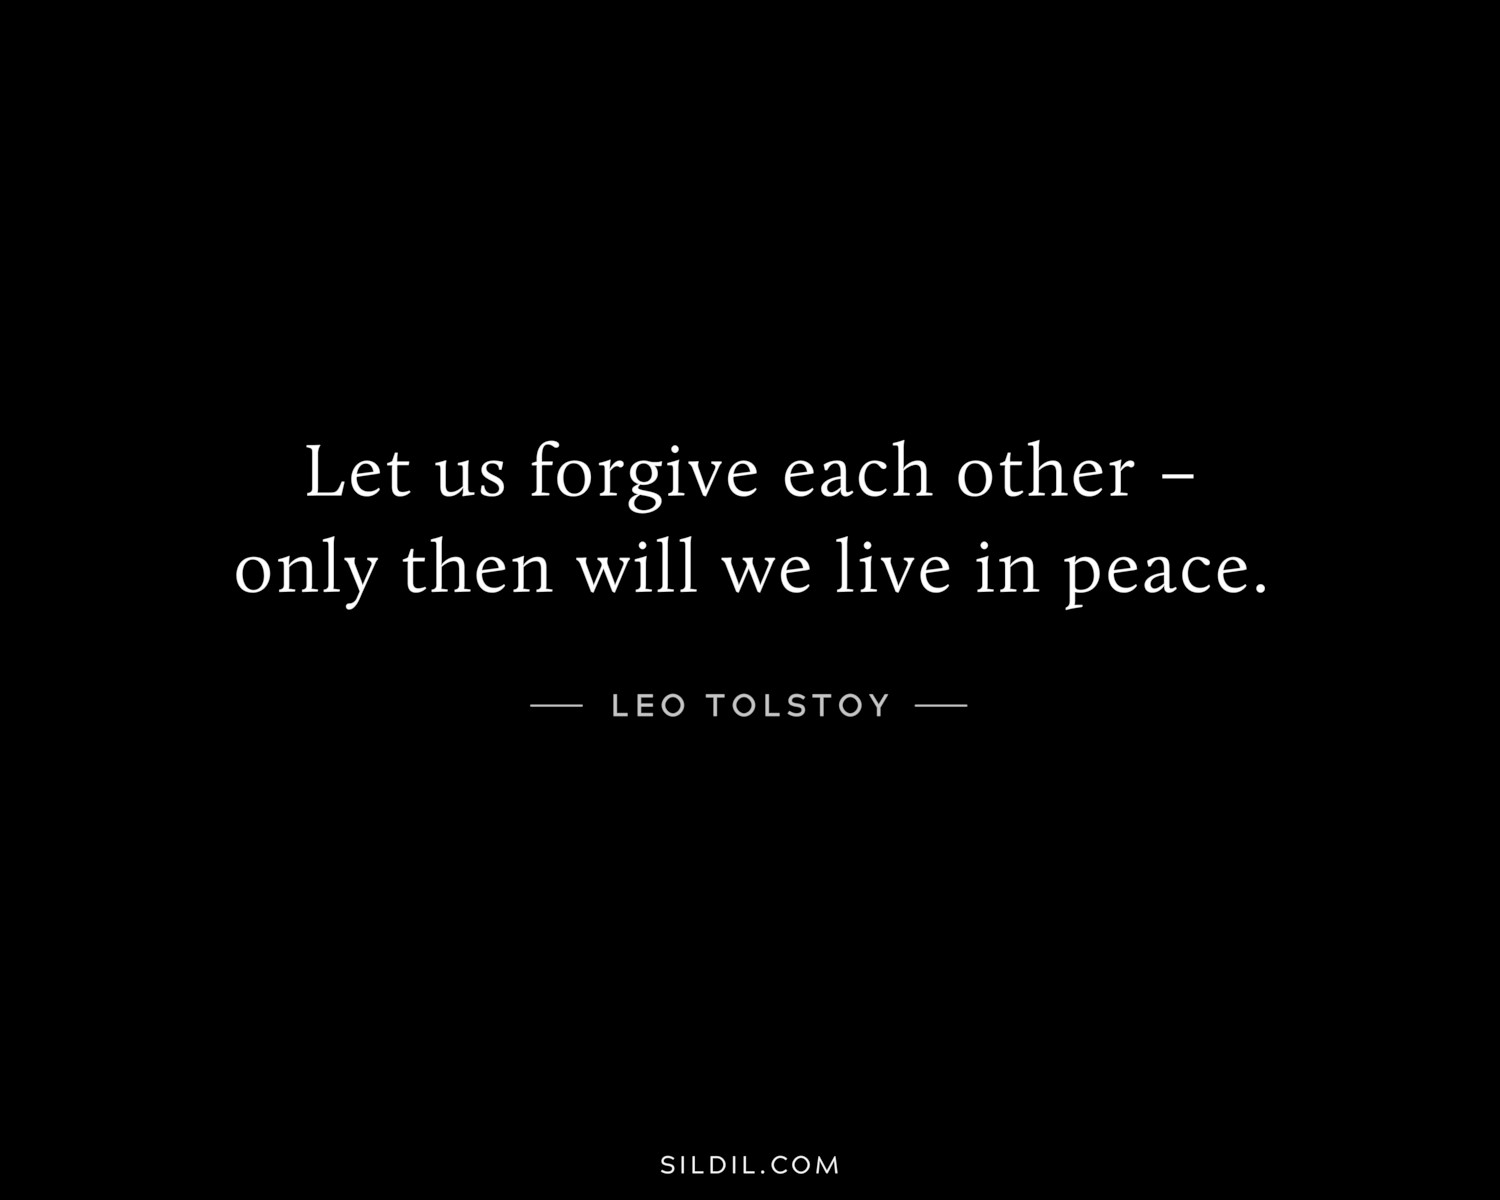 Let us forgive each other – only then will we live in peace.